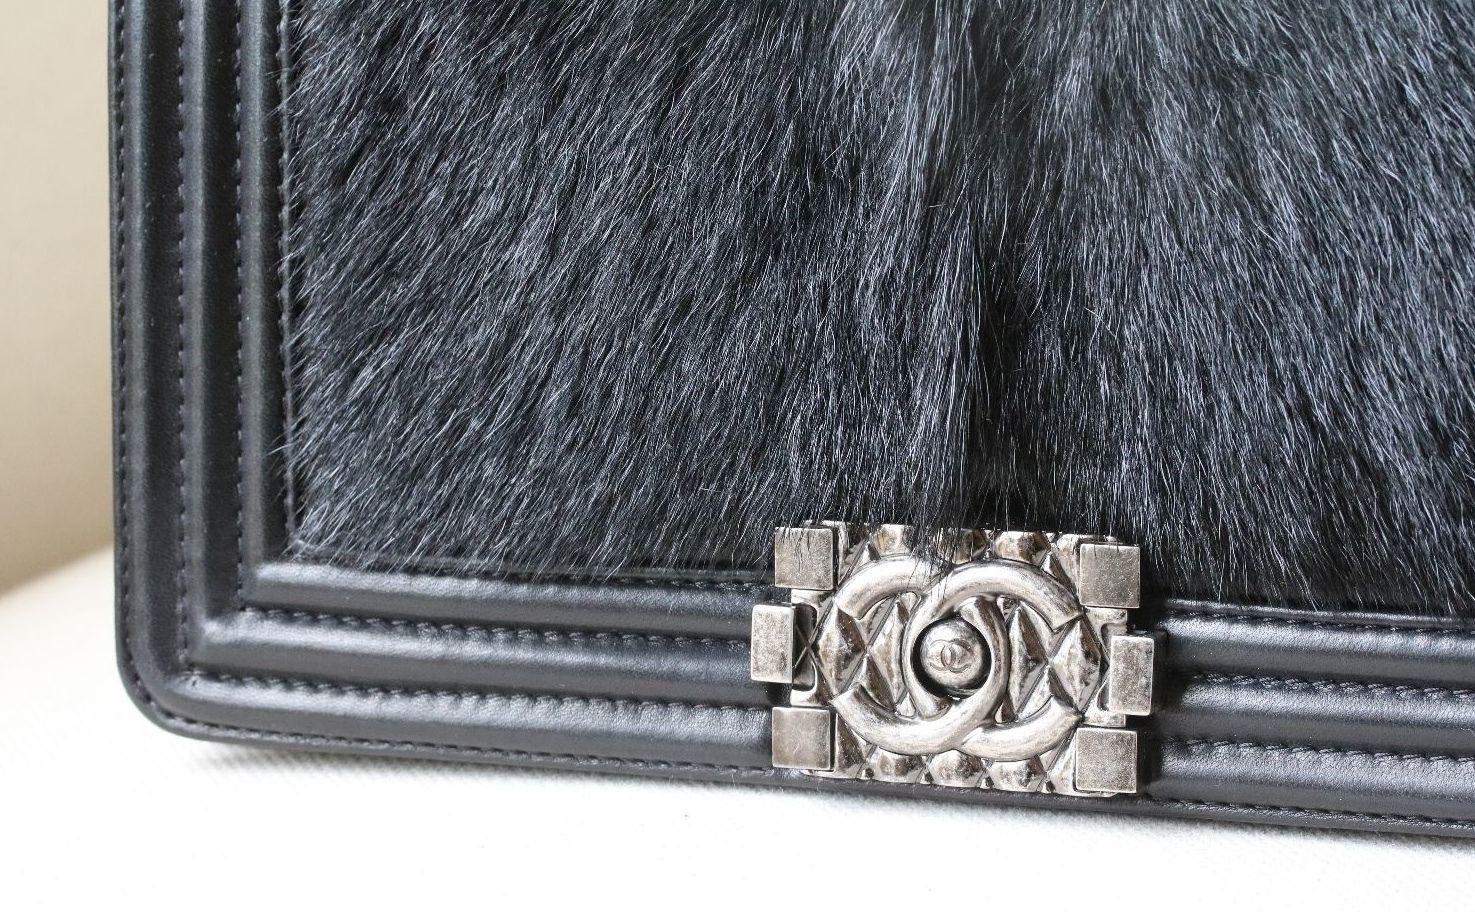 The Chanel Goatskin and Hair Boy Bag perfectly explains why Chanel's beautiful handbags are so coveted. Featuring goatskin and hair detail. It is comparable to a piece of fine art. Add this bag to your collection and you will carry a piece of